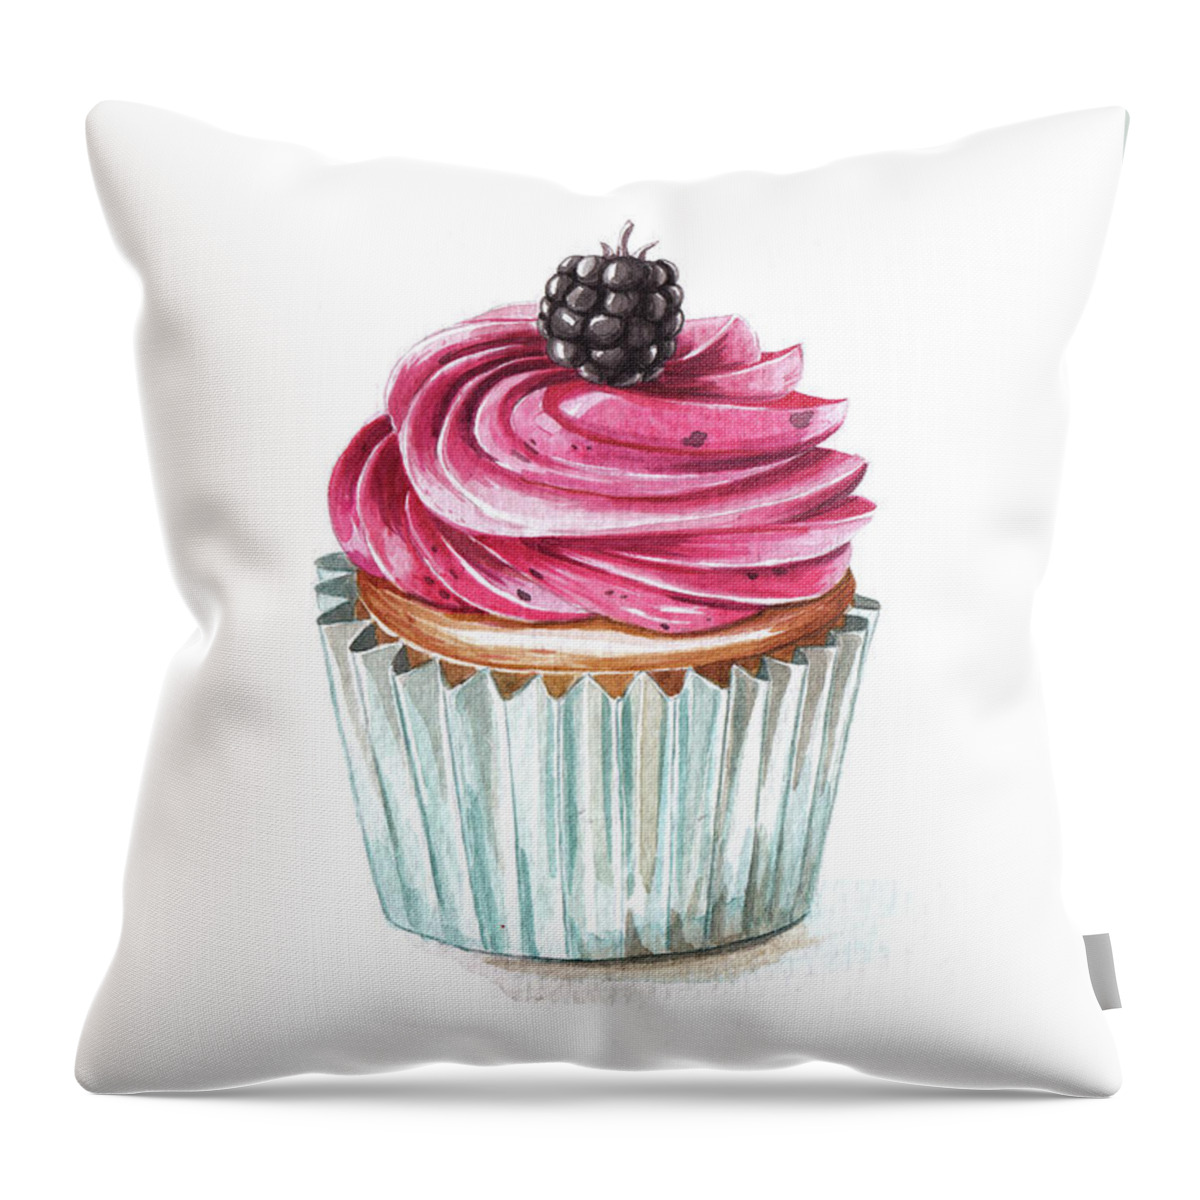 Blueberry Throw Pillow featuring the painting Blueberry cupcake by Anastasia Stepanova